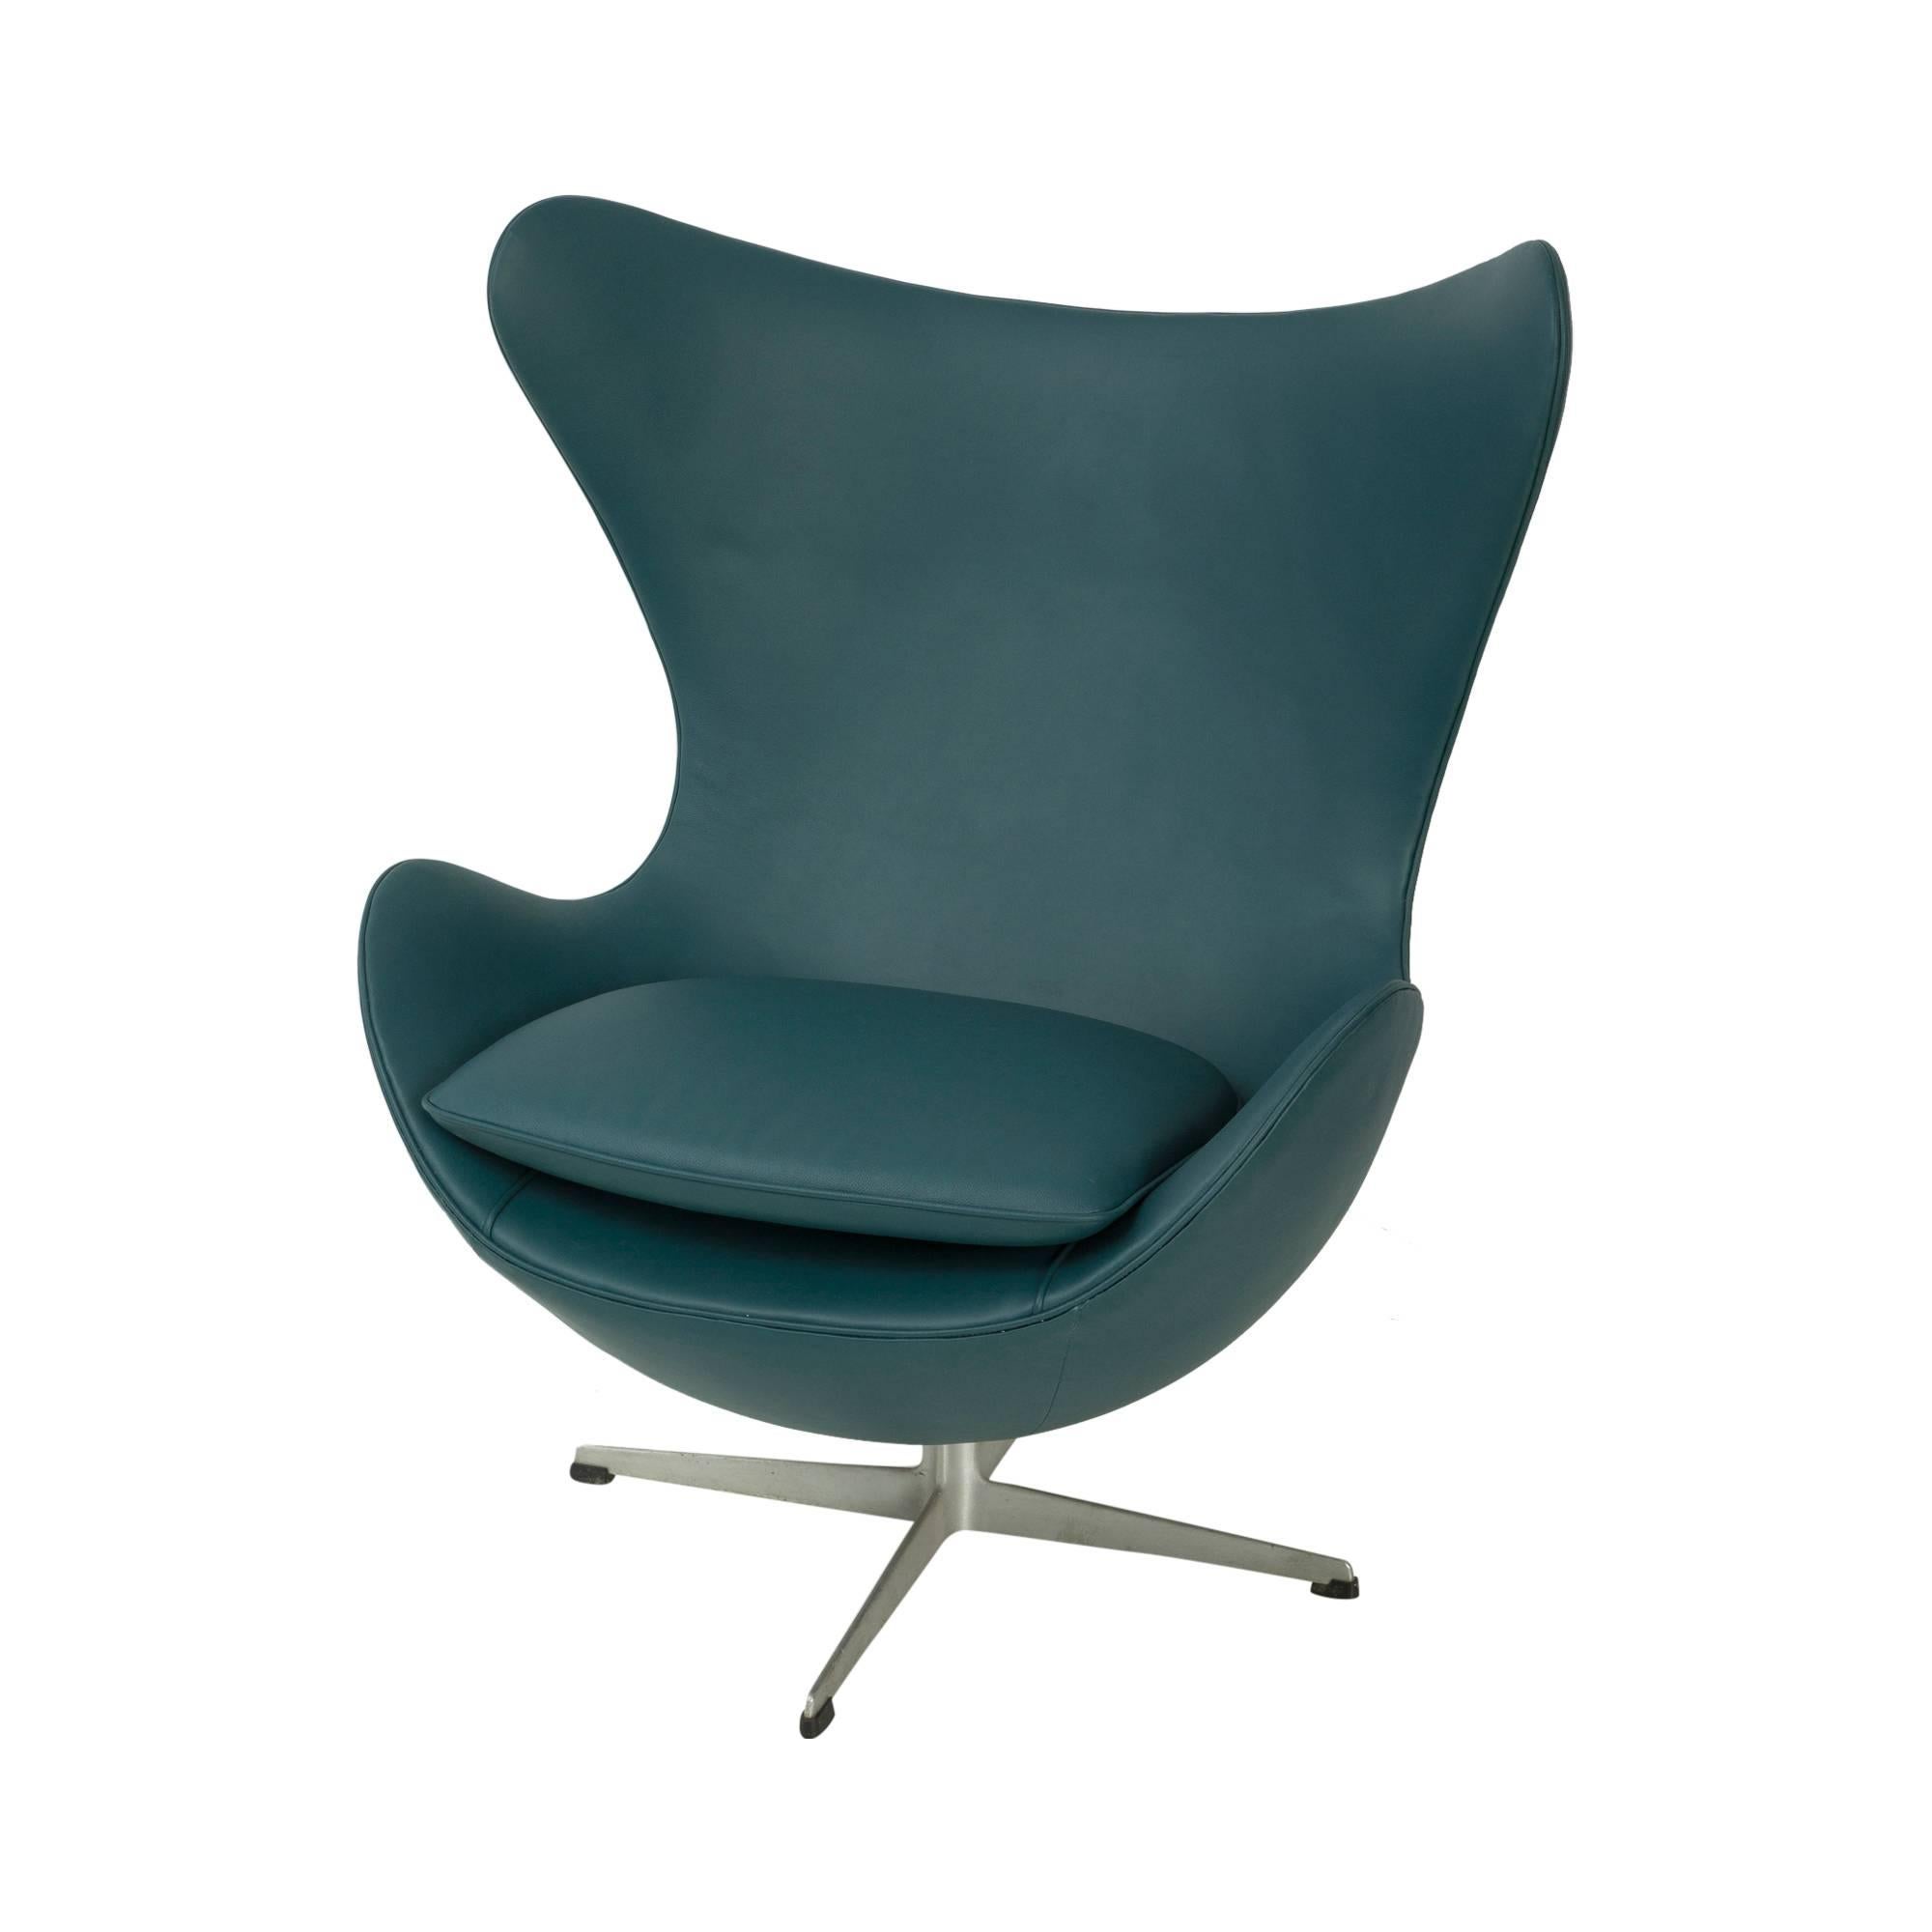 Early production Egg Chair designed by Arne Jacobsen for Fritz Hansen. Newly and expertly reupholstered in high quality, full-grain Italian Spinneybeck teal leather. An unparalleled crossroads of design, quality, and luxury. 

Though the early